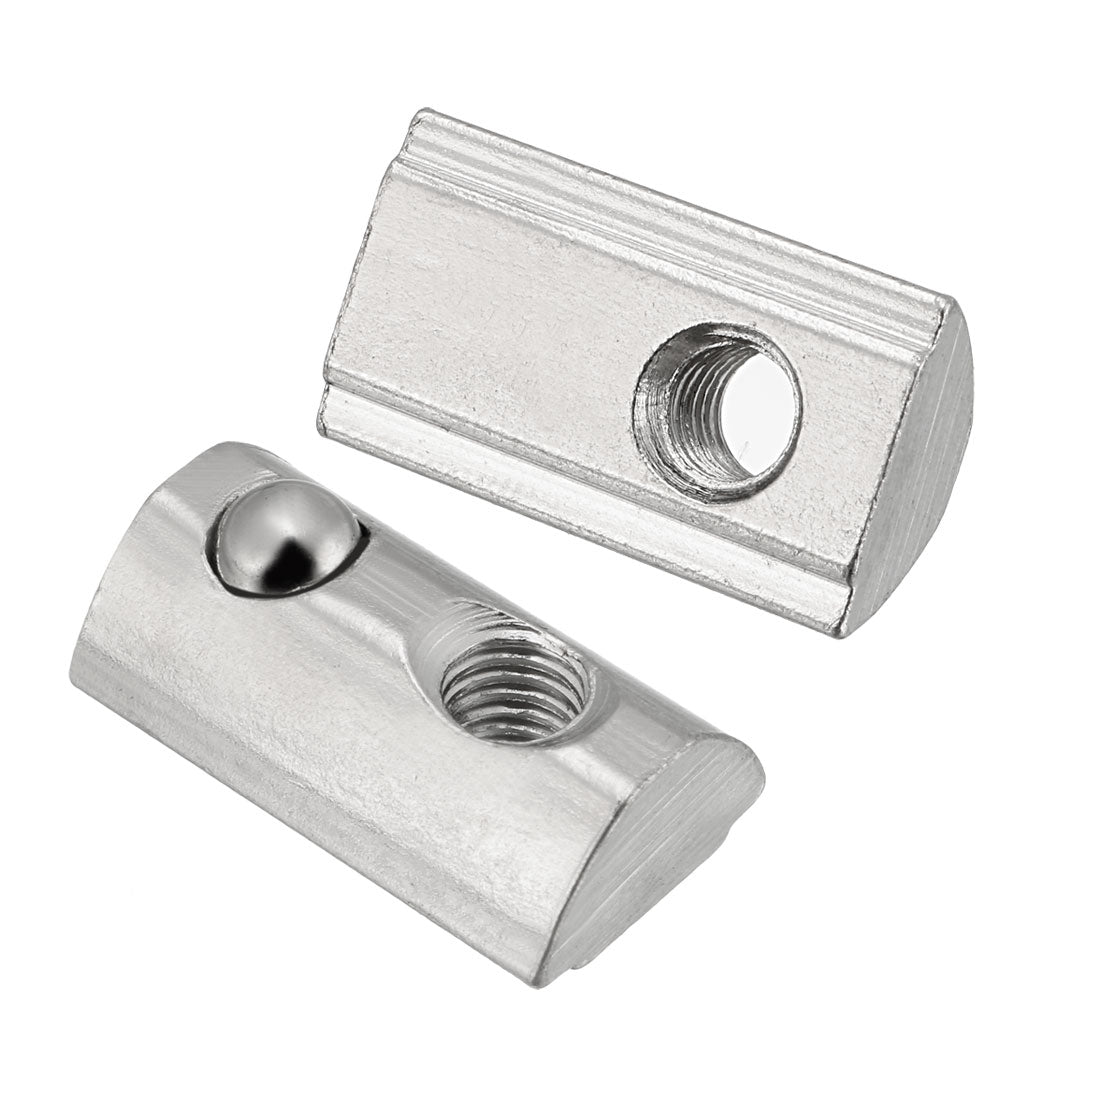 Uxcell Uxcell Roll-In Spring M8 T Nut 3030 Series Aluminum Extrusion, for 7.5mm T Slot 12 Pcs